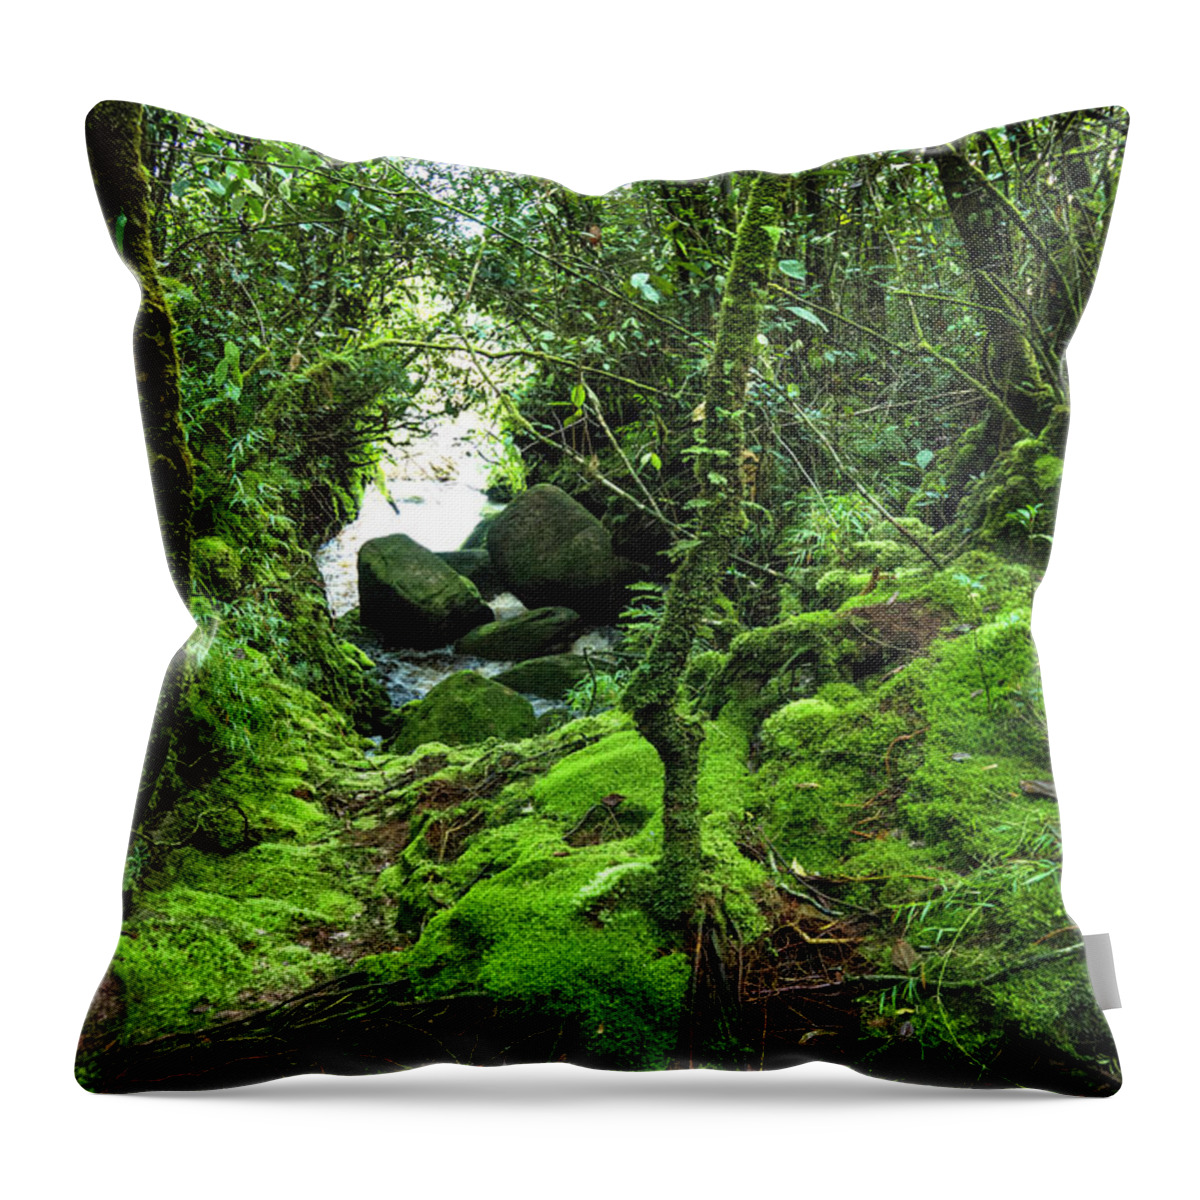 Tropical Rainforest Throw Pillow featuring the photograph Tropical Rain Forest At Auyantepuy by Apomares